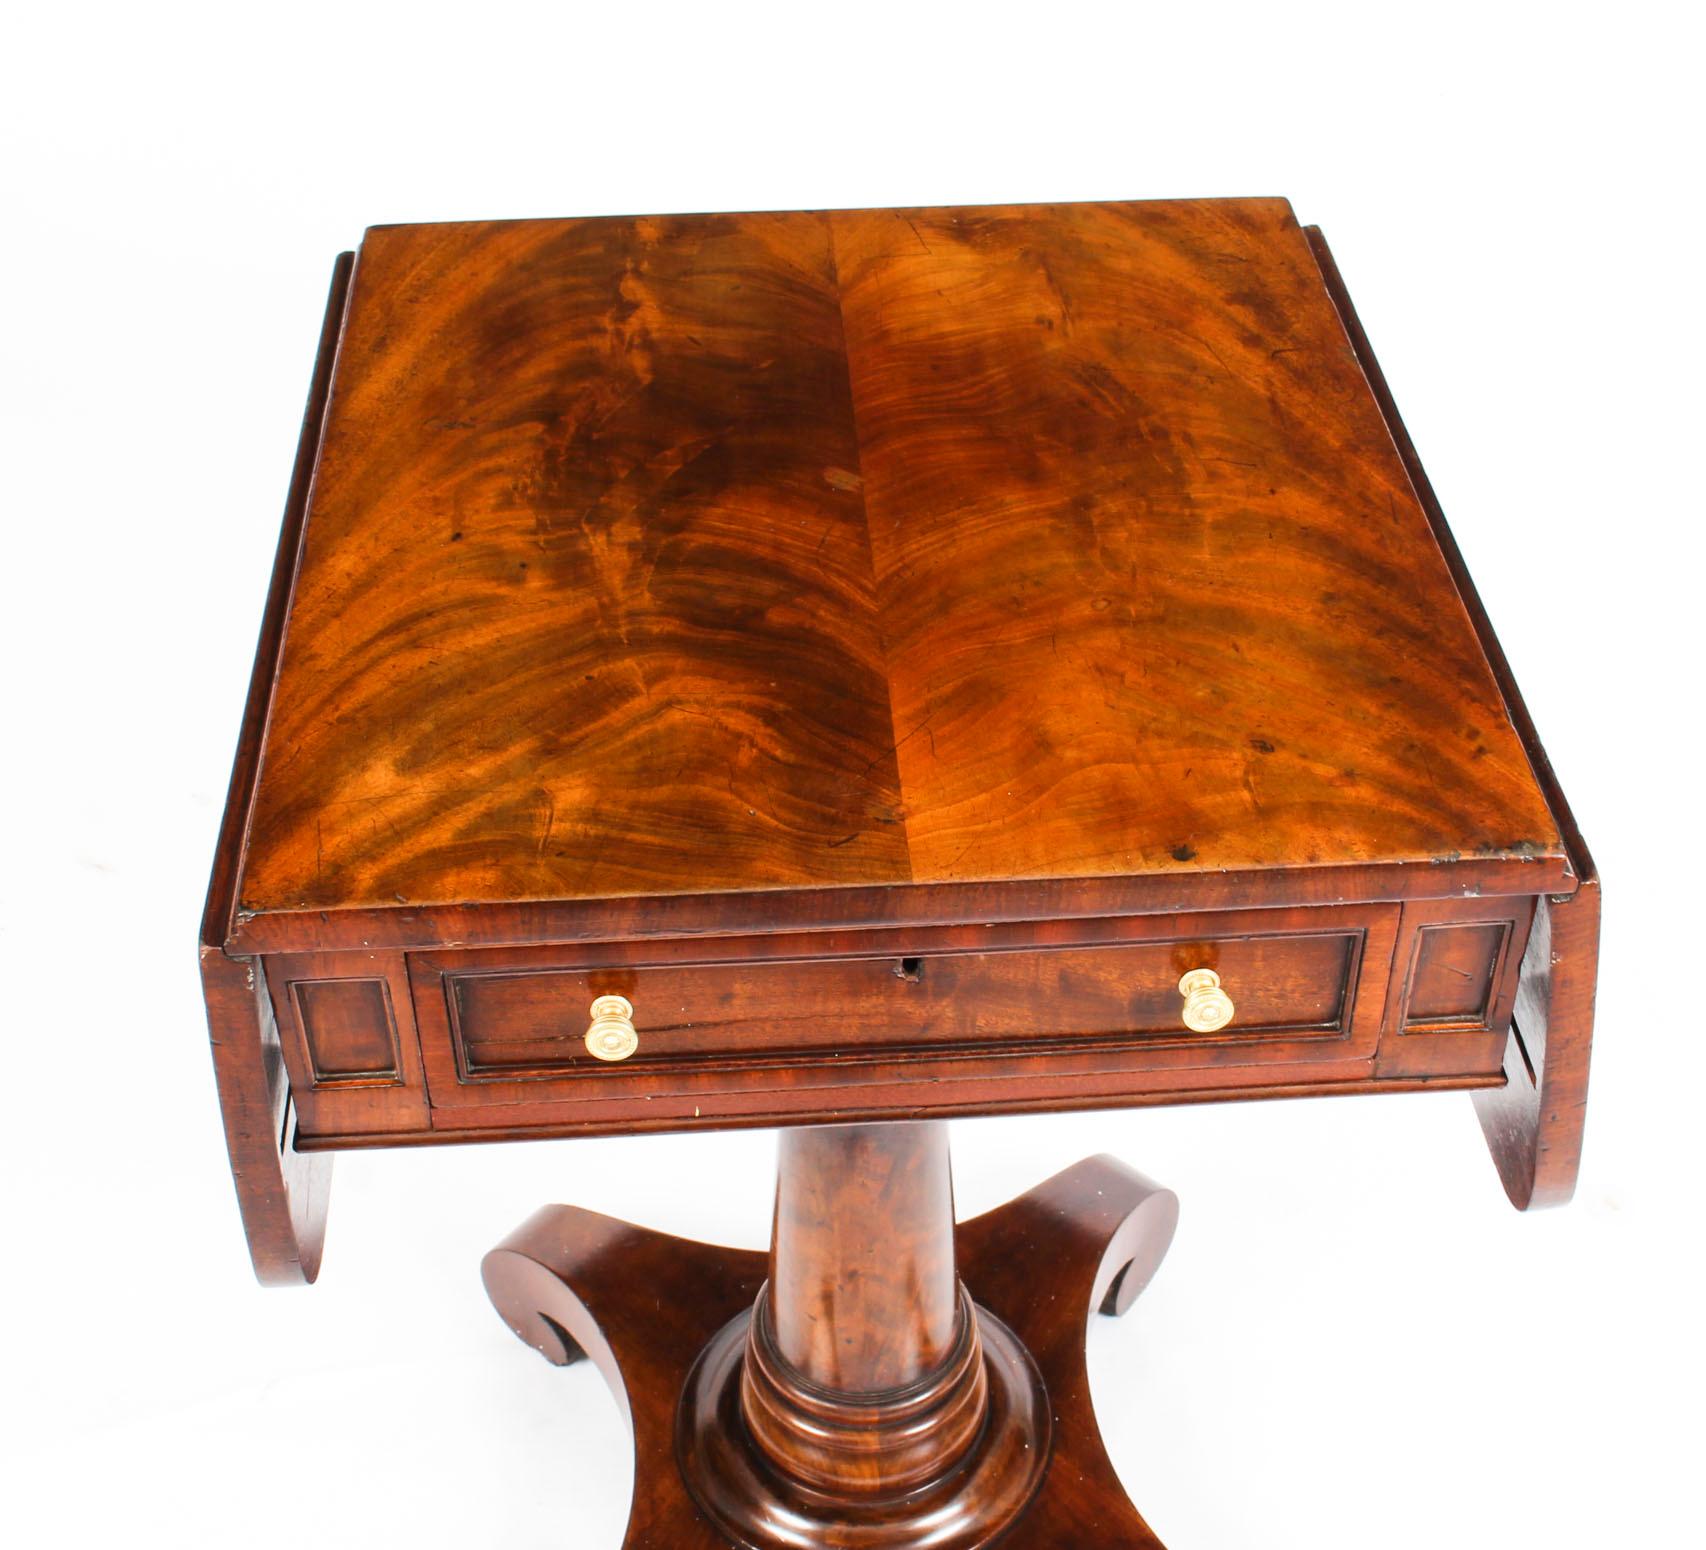 An exquisite antique William IV flame mahogany drop leaf work table, circa 1830 in date.

This beautiful work table has a useful frieze drawer with a paneled drawer front and features Y-pattern supports with a sturdy turned centre column and a